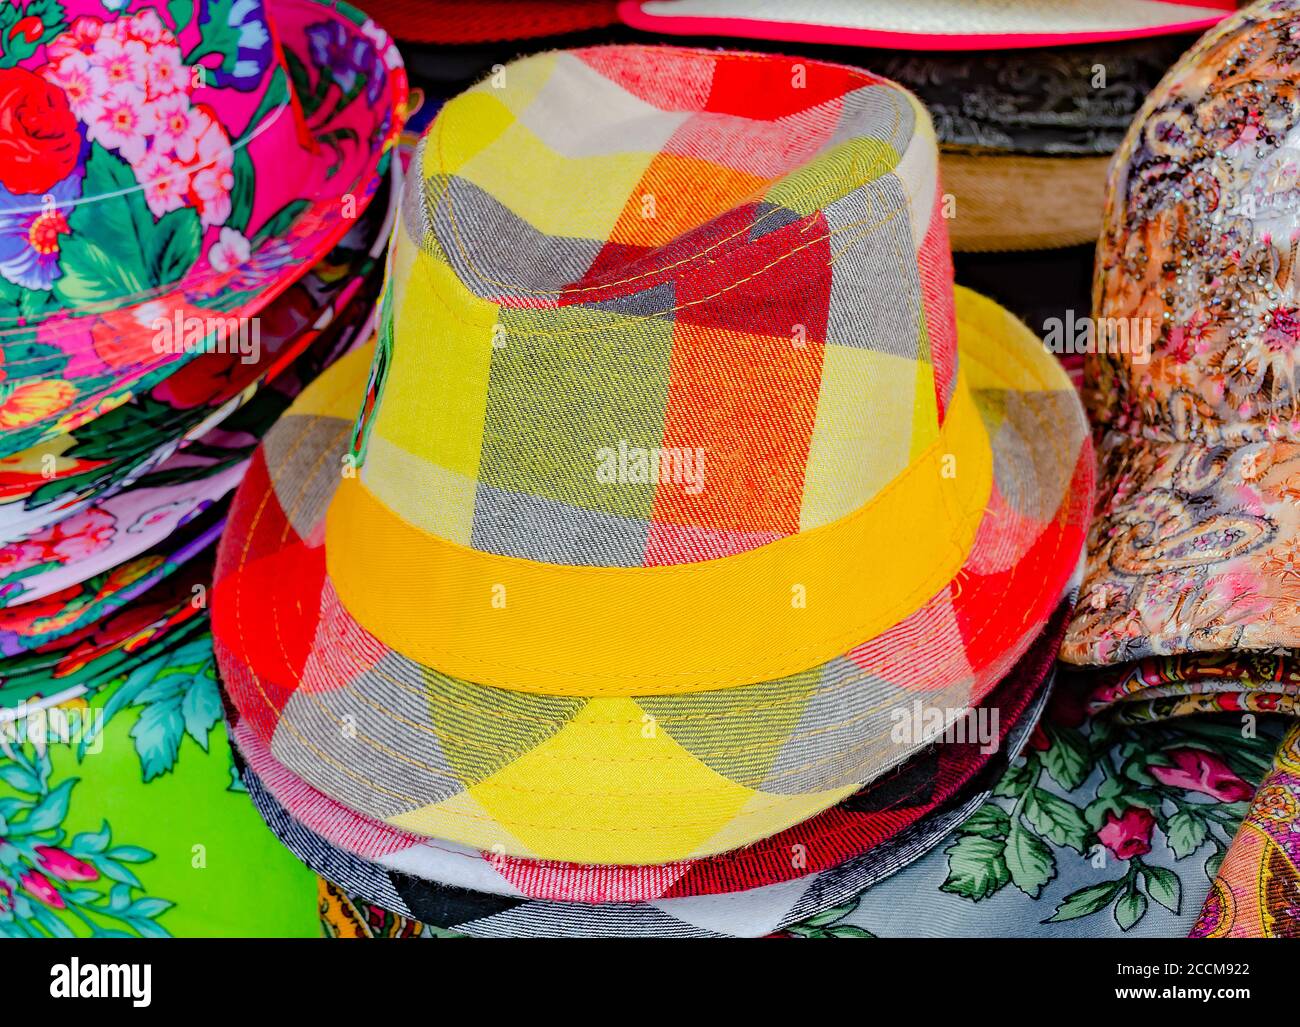 Colorful summer hats on sale Stock Photo